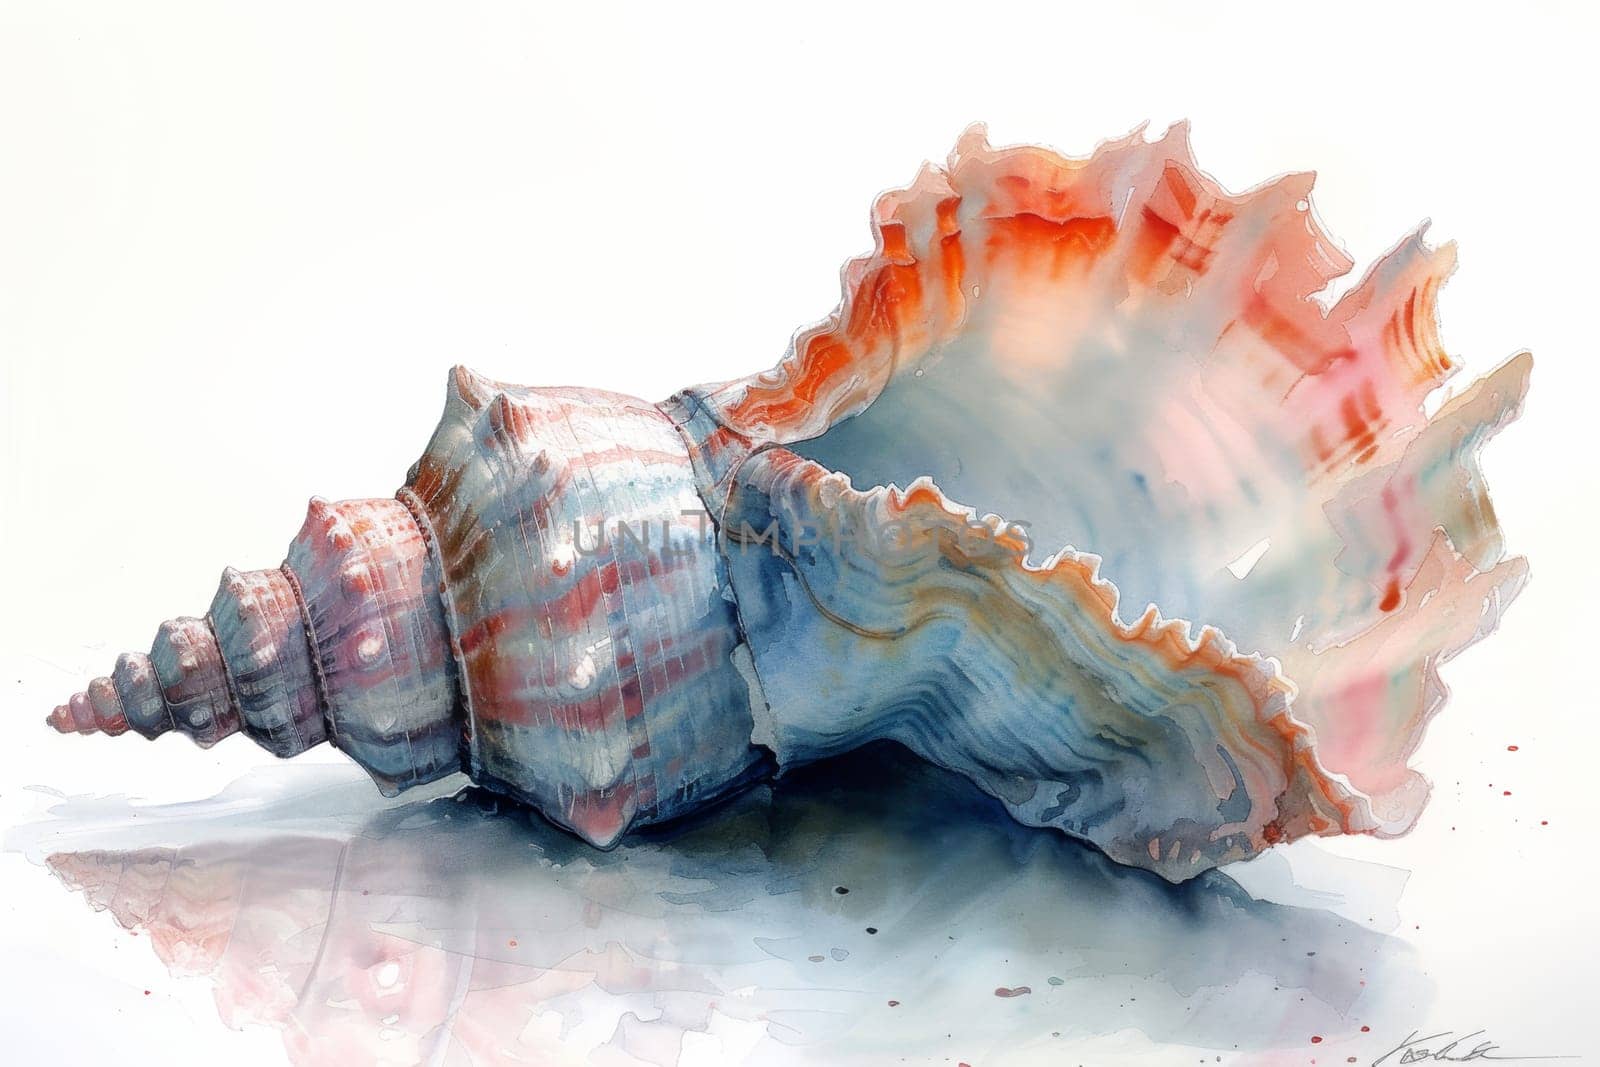 A large seashell on a white background. Illustration by Lobachad